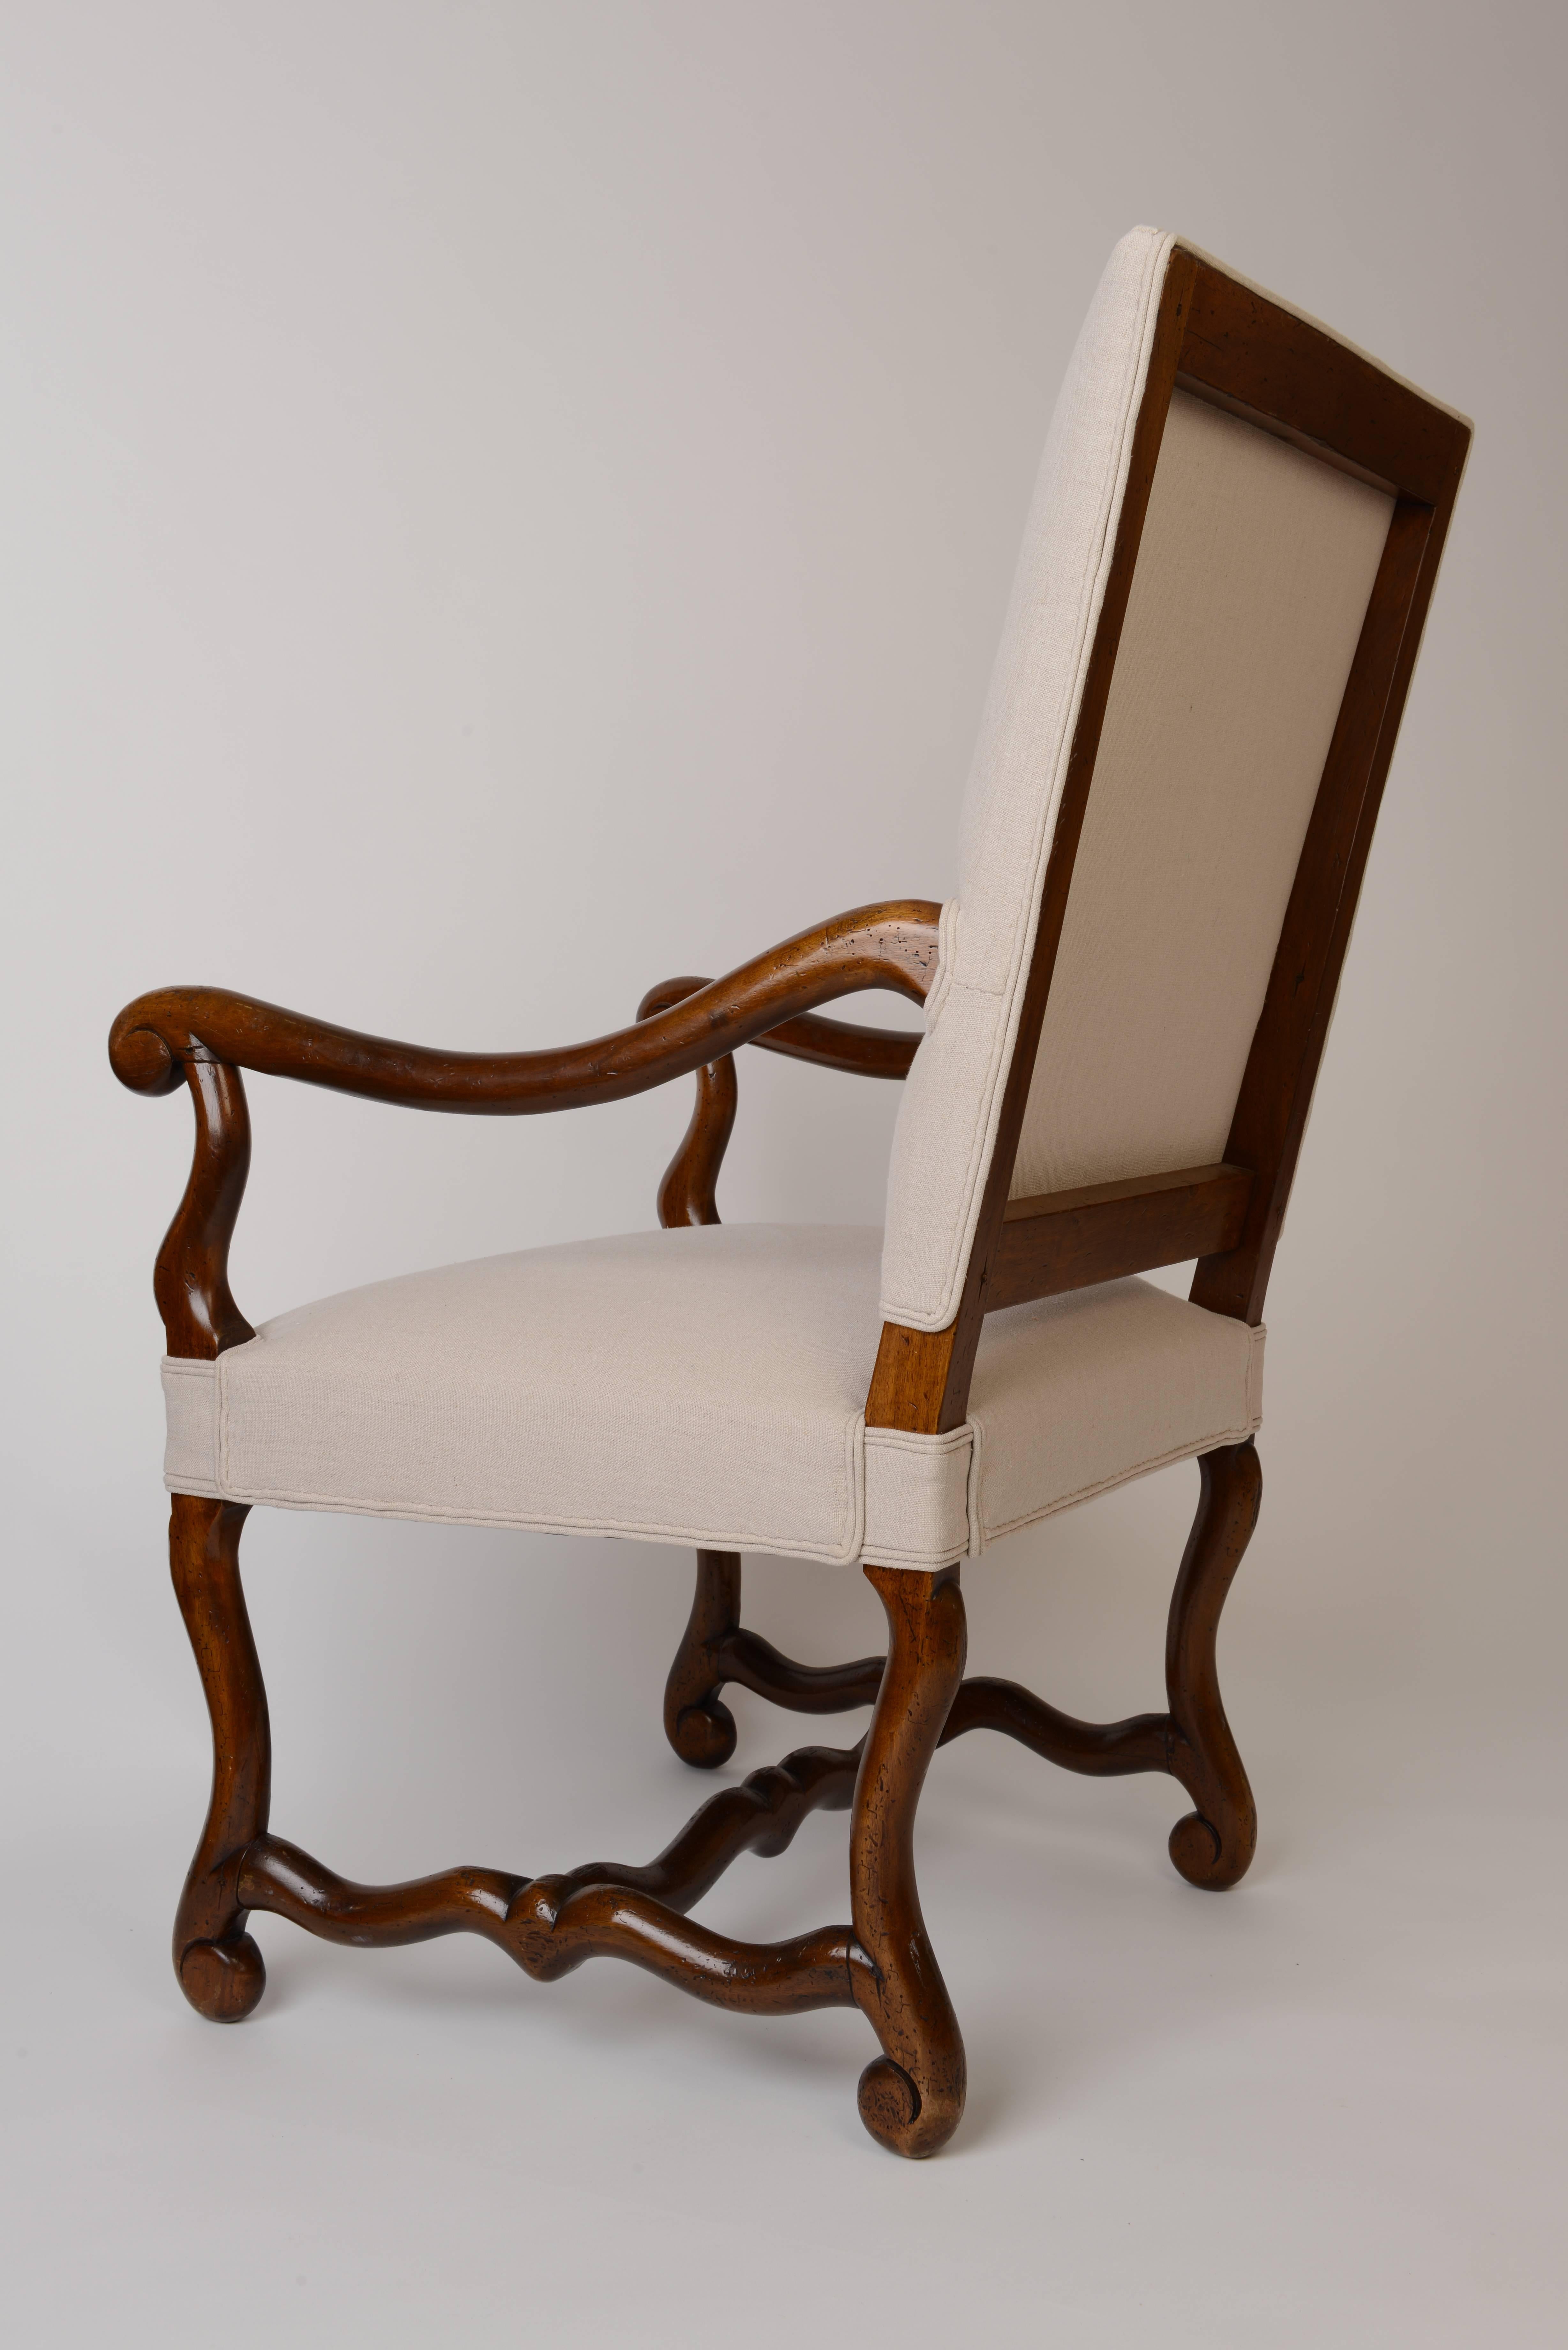 Baroque 18th Century, French Os de Mouton Armchair in Walnut and Belgian Linen